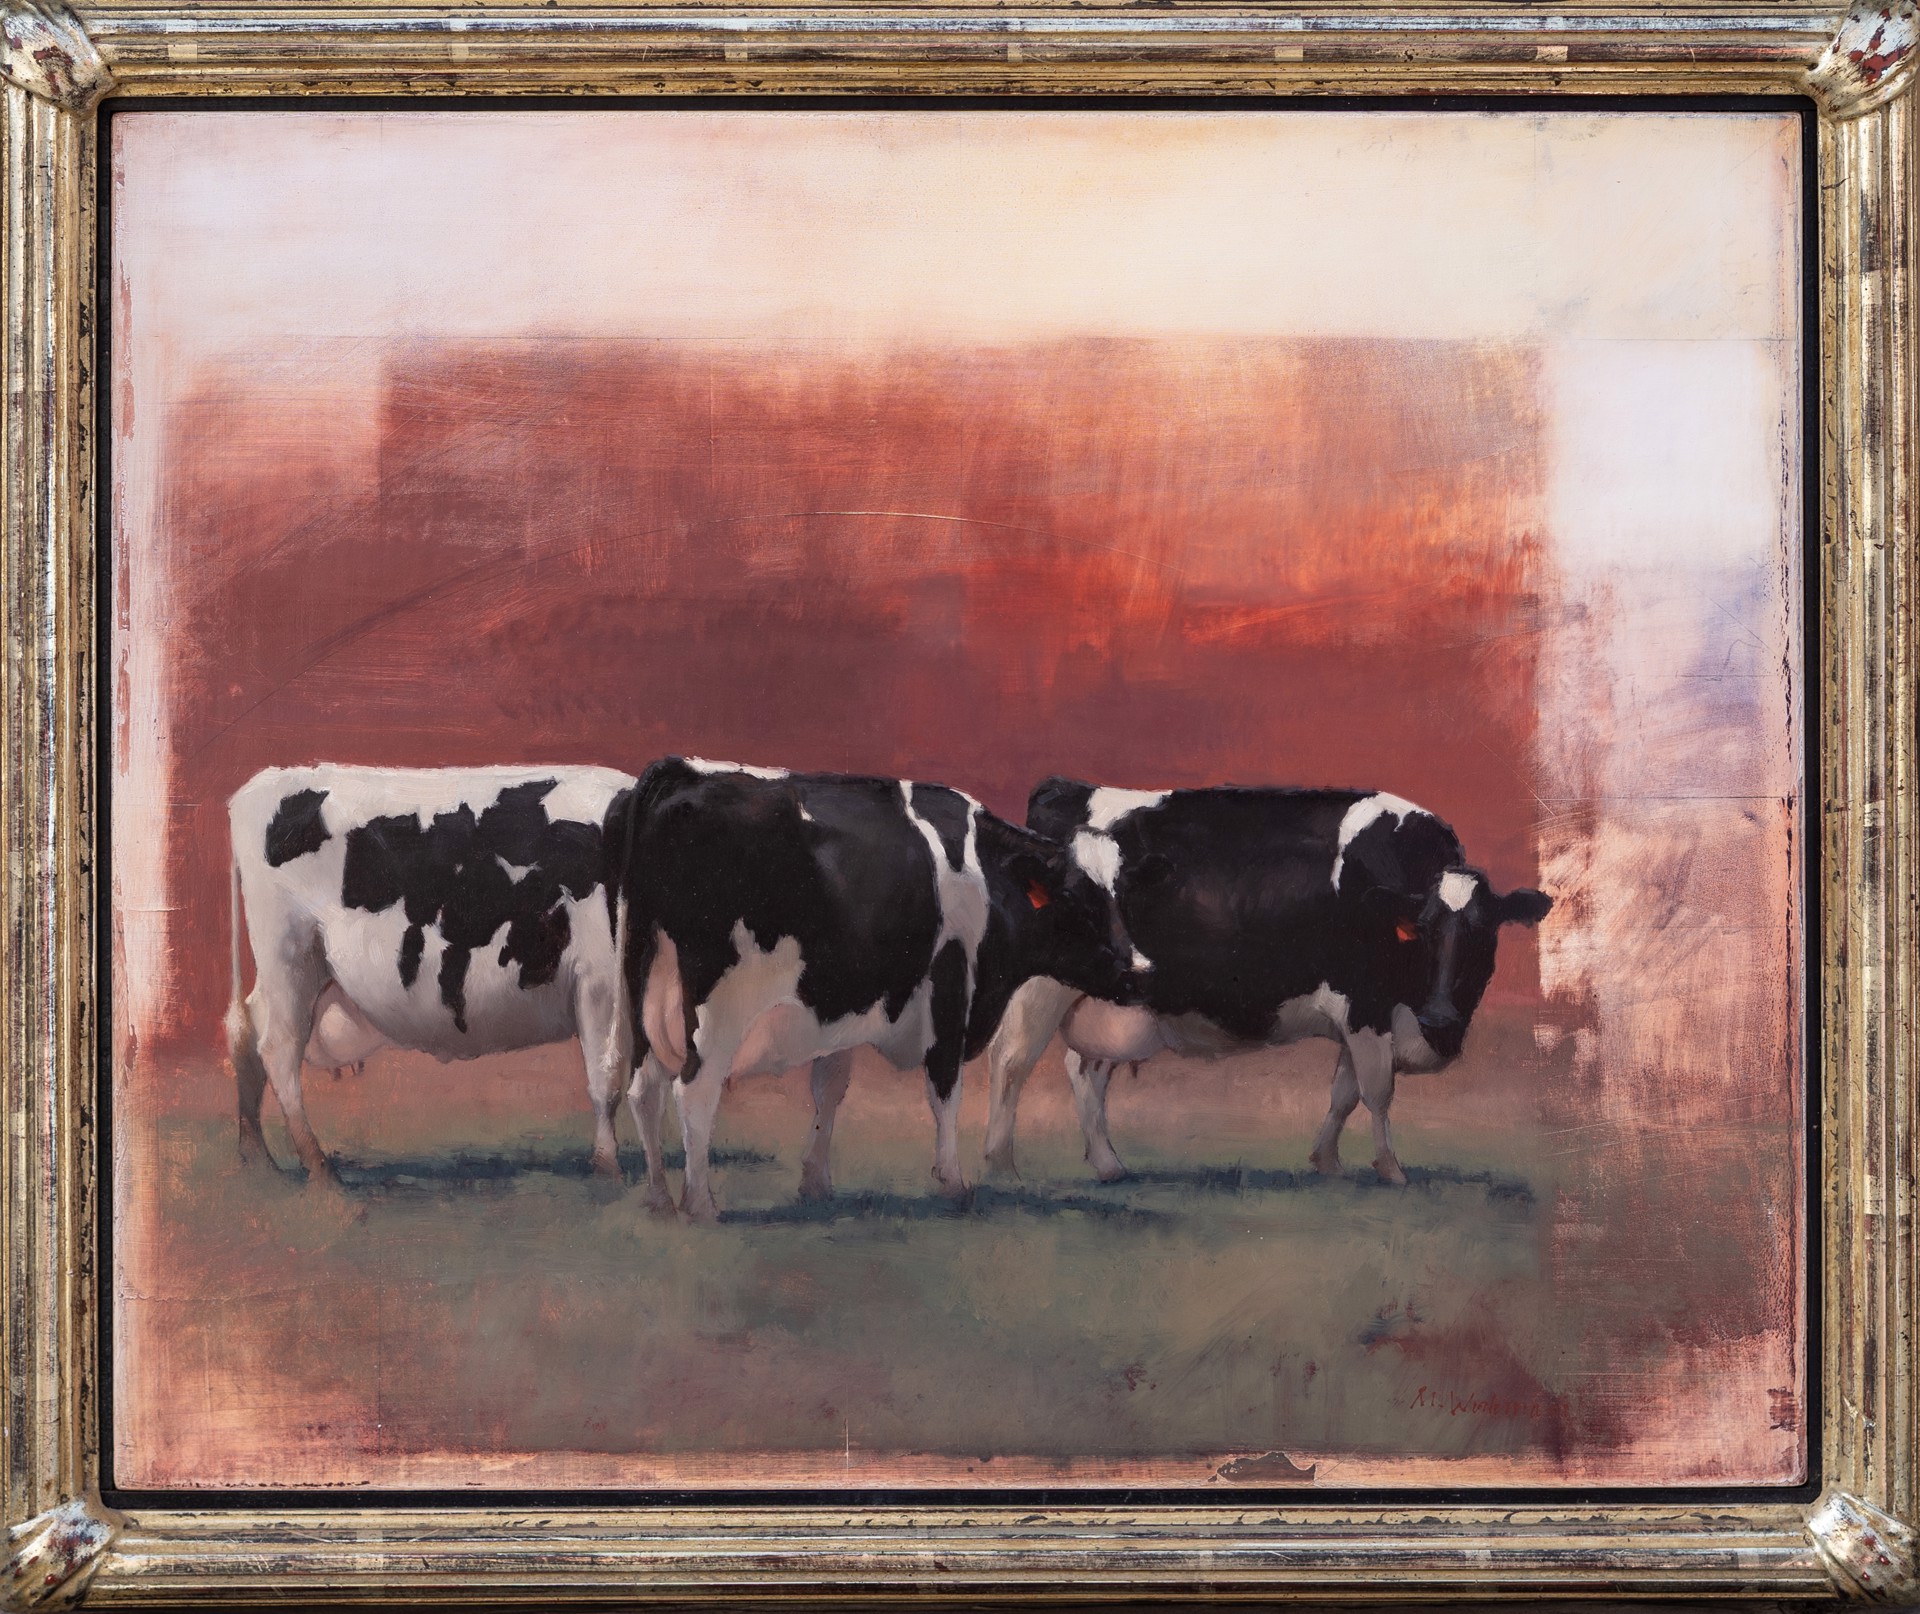 Michael Workman, 3 Cows by Secondary Offerings